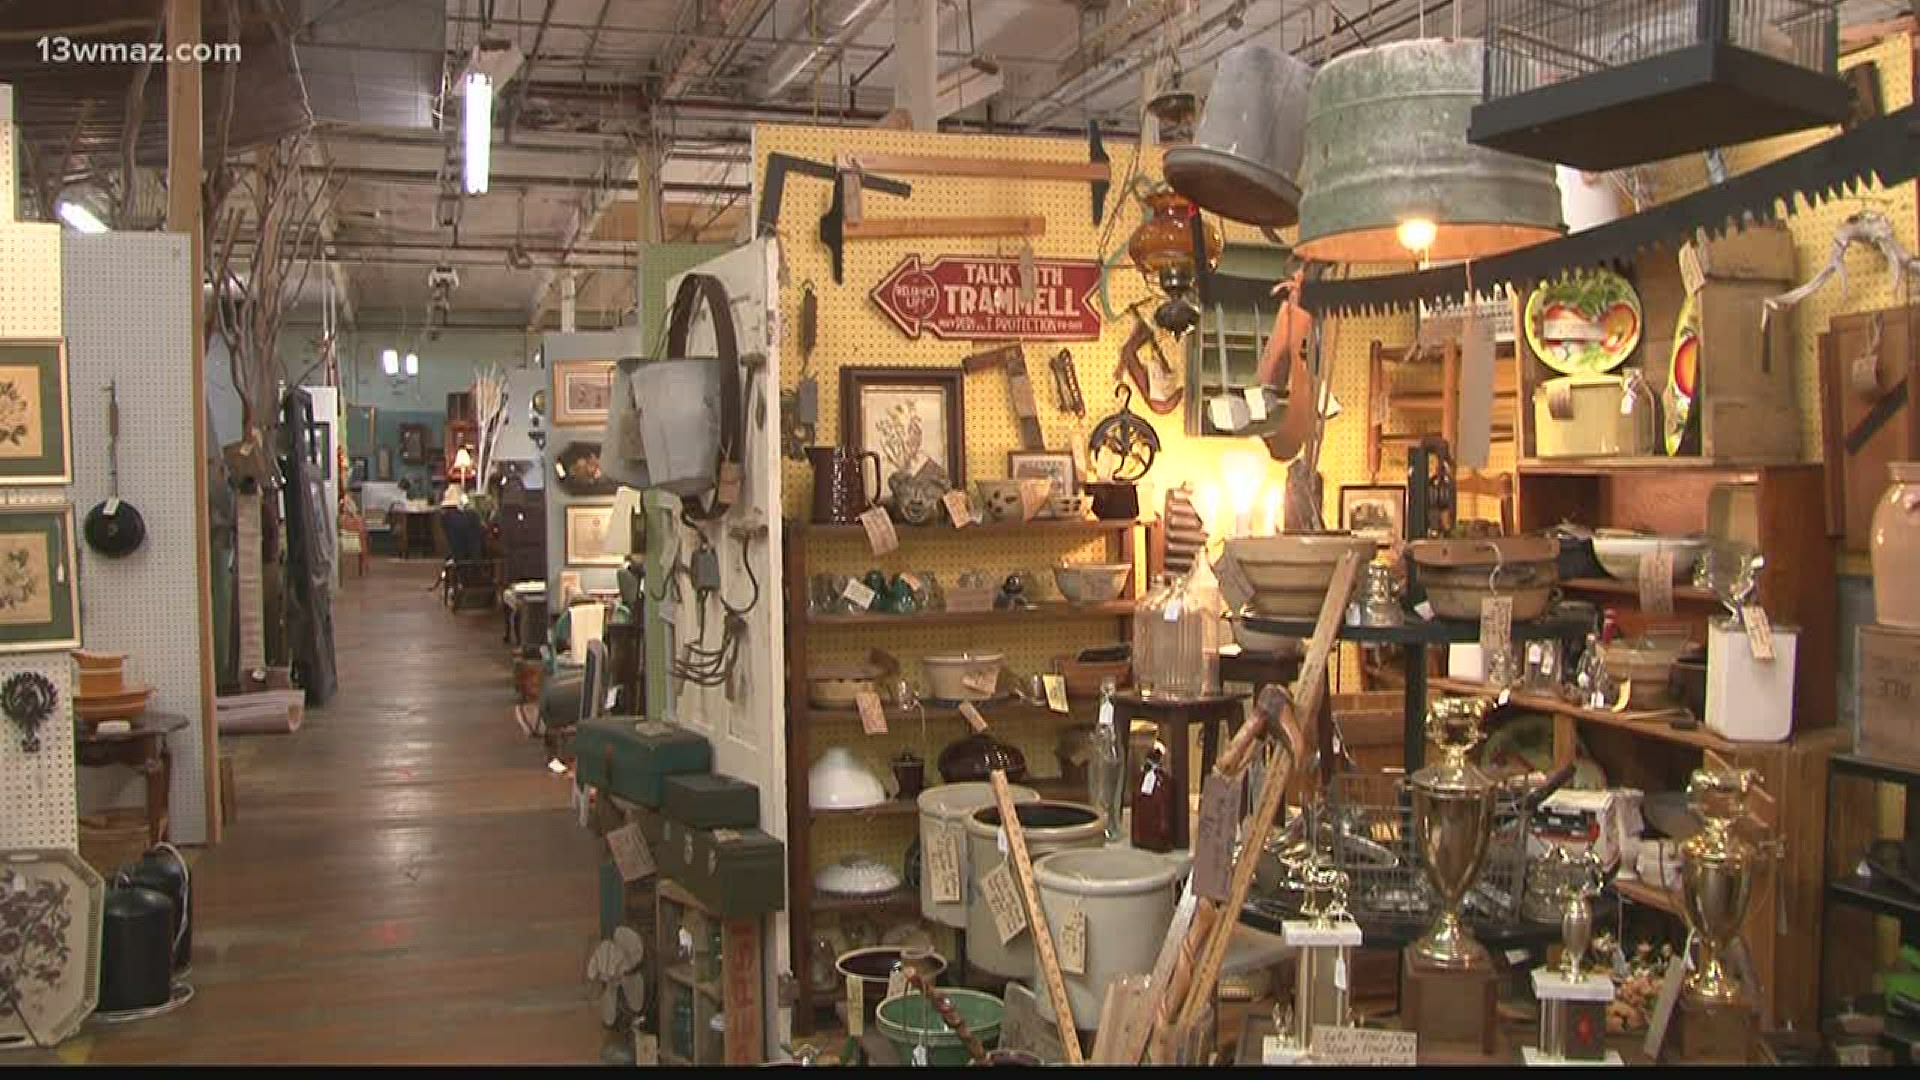 Payne Mill Village Antique Mall owner Billy Bagwell said he's glad his stores are among the many that have reopened for business.